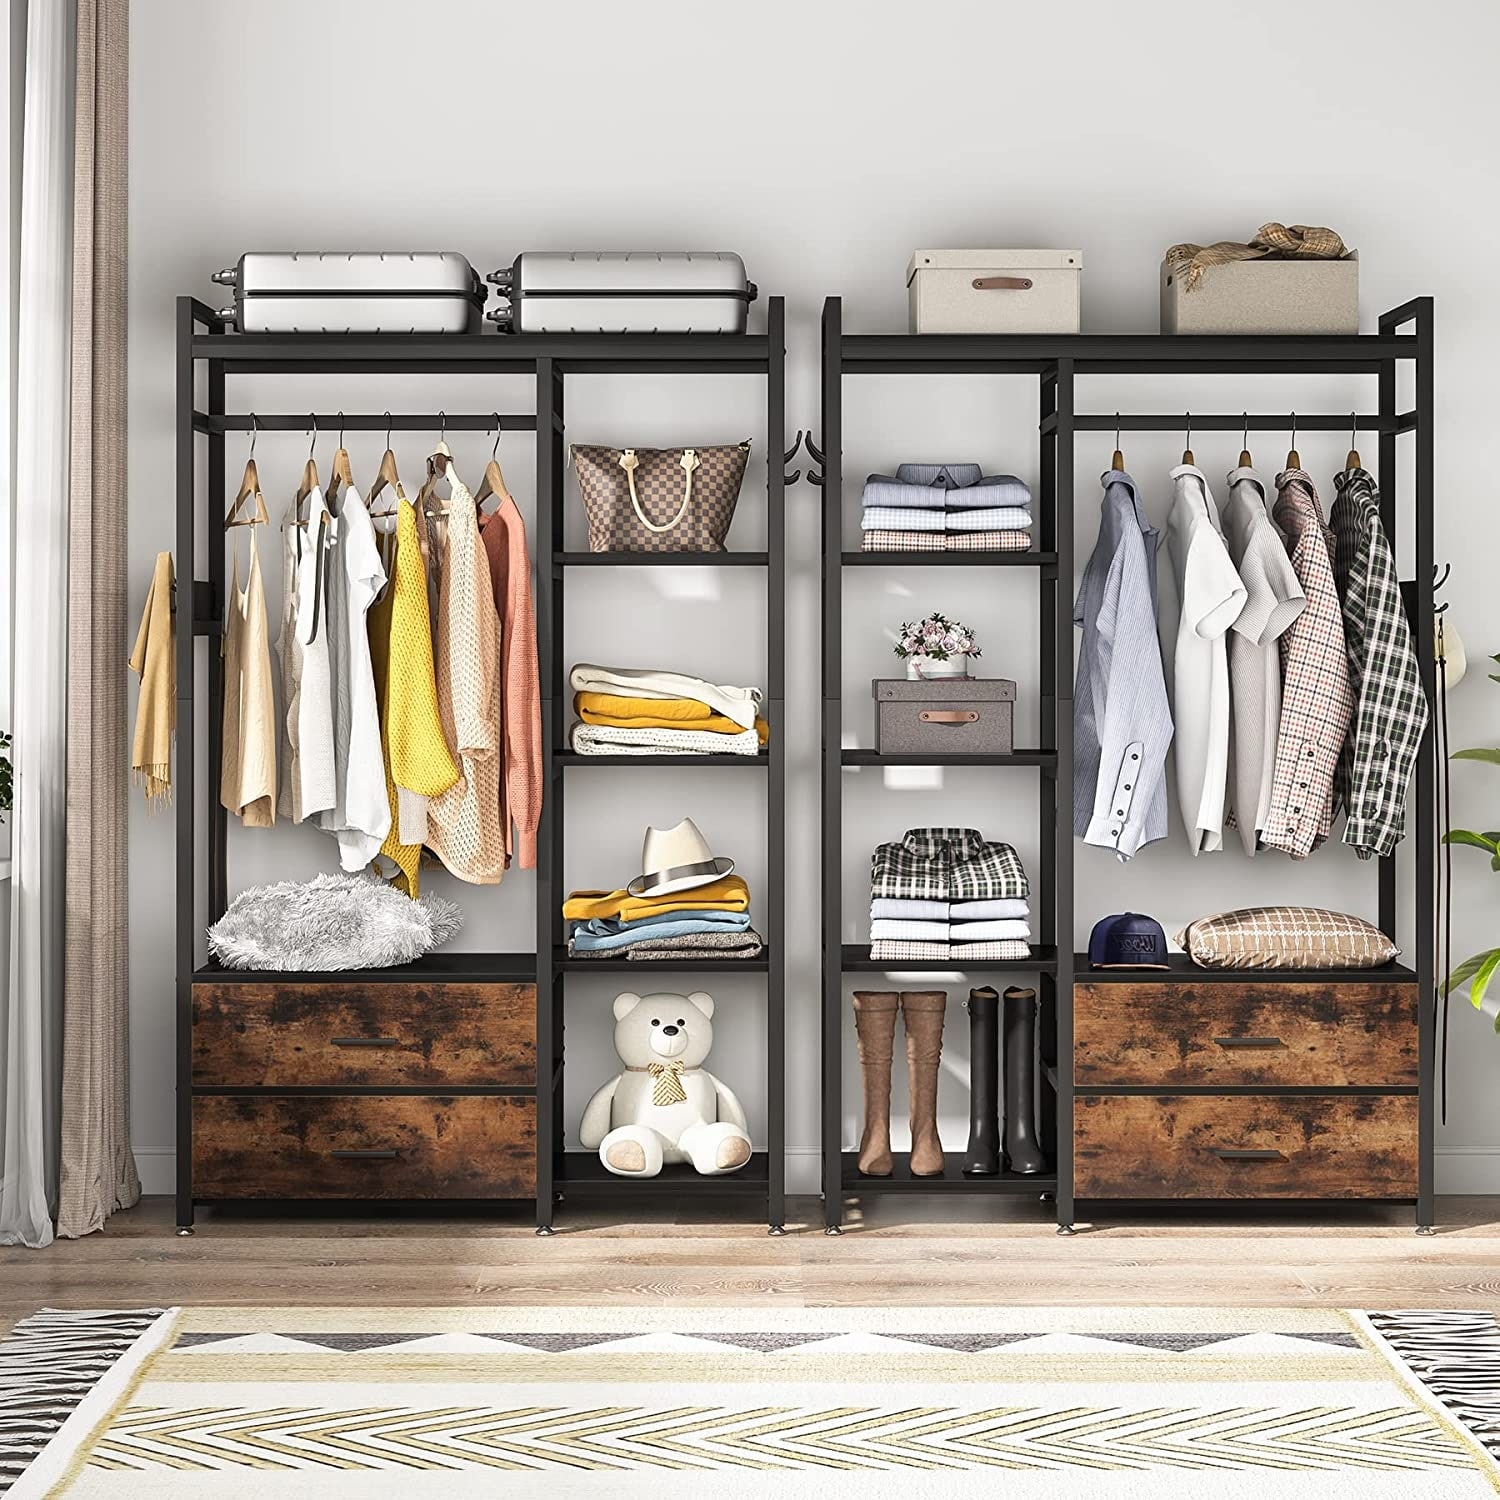 https://ak1.ostkcdn.com/images/products/is/images/direct/d62966c0c82b9d219182e9f6e86c11de8c8a654a/Freestanding-Closet-Organizer%2C-Clothes-Rack-with-Drawers%2C-Garment-Rack-Hanging-Clothing-Wardrobe-Storage-Closet-for-Bedroom.jpg